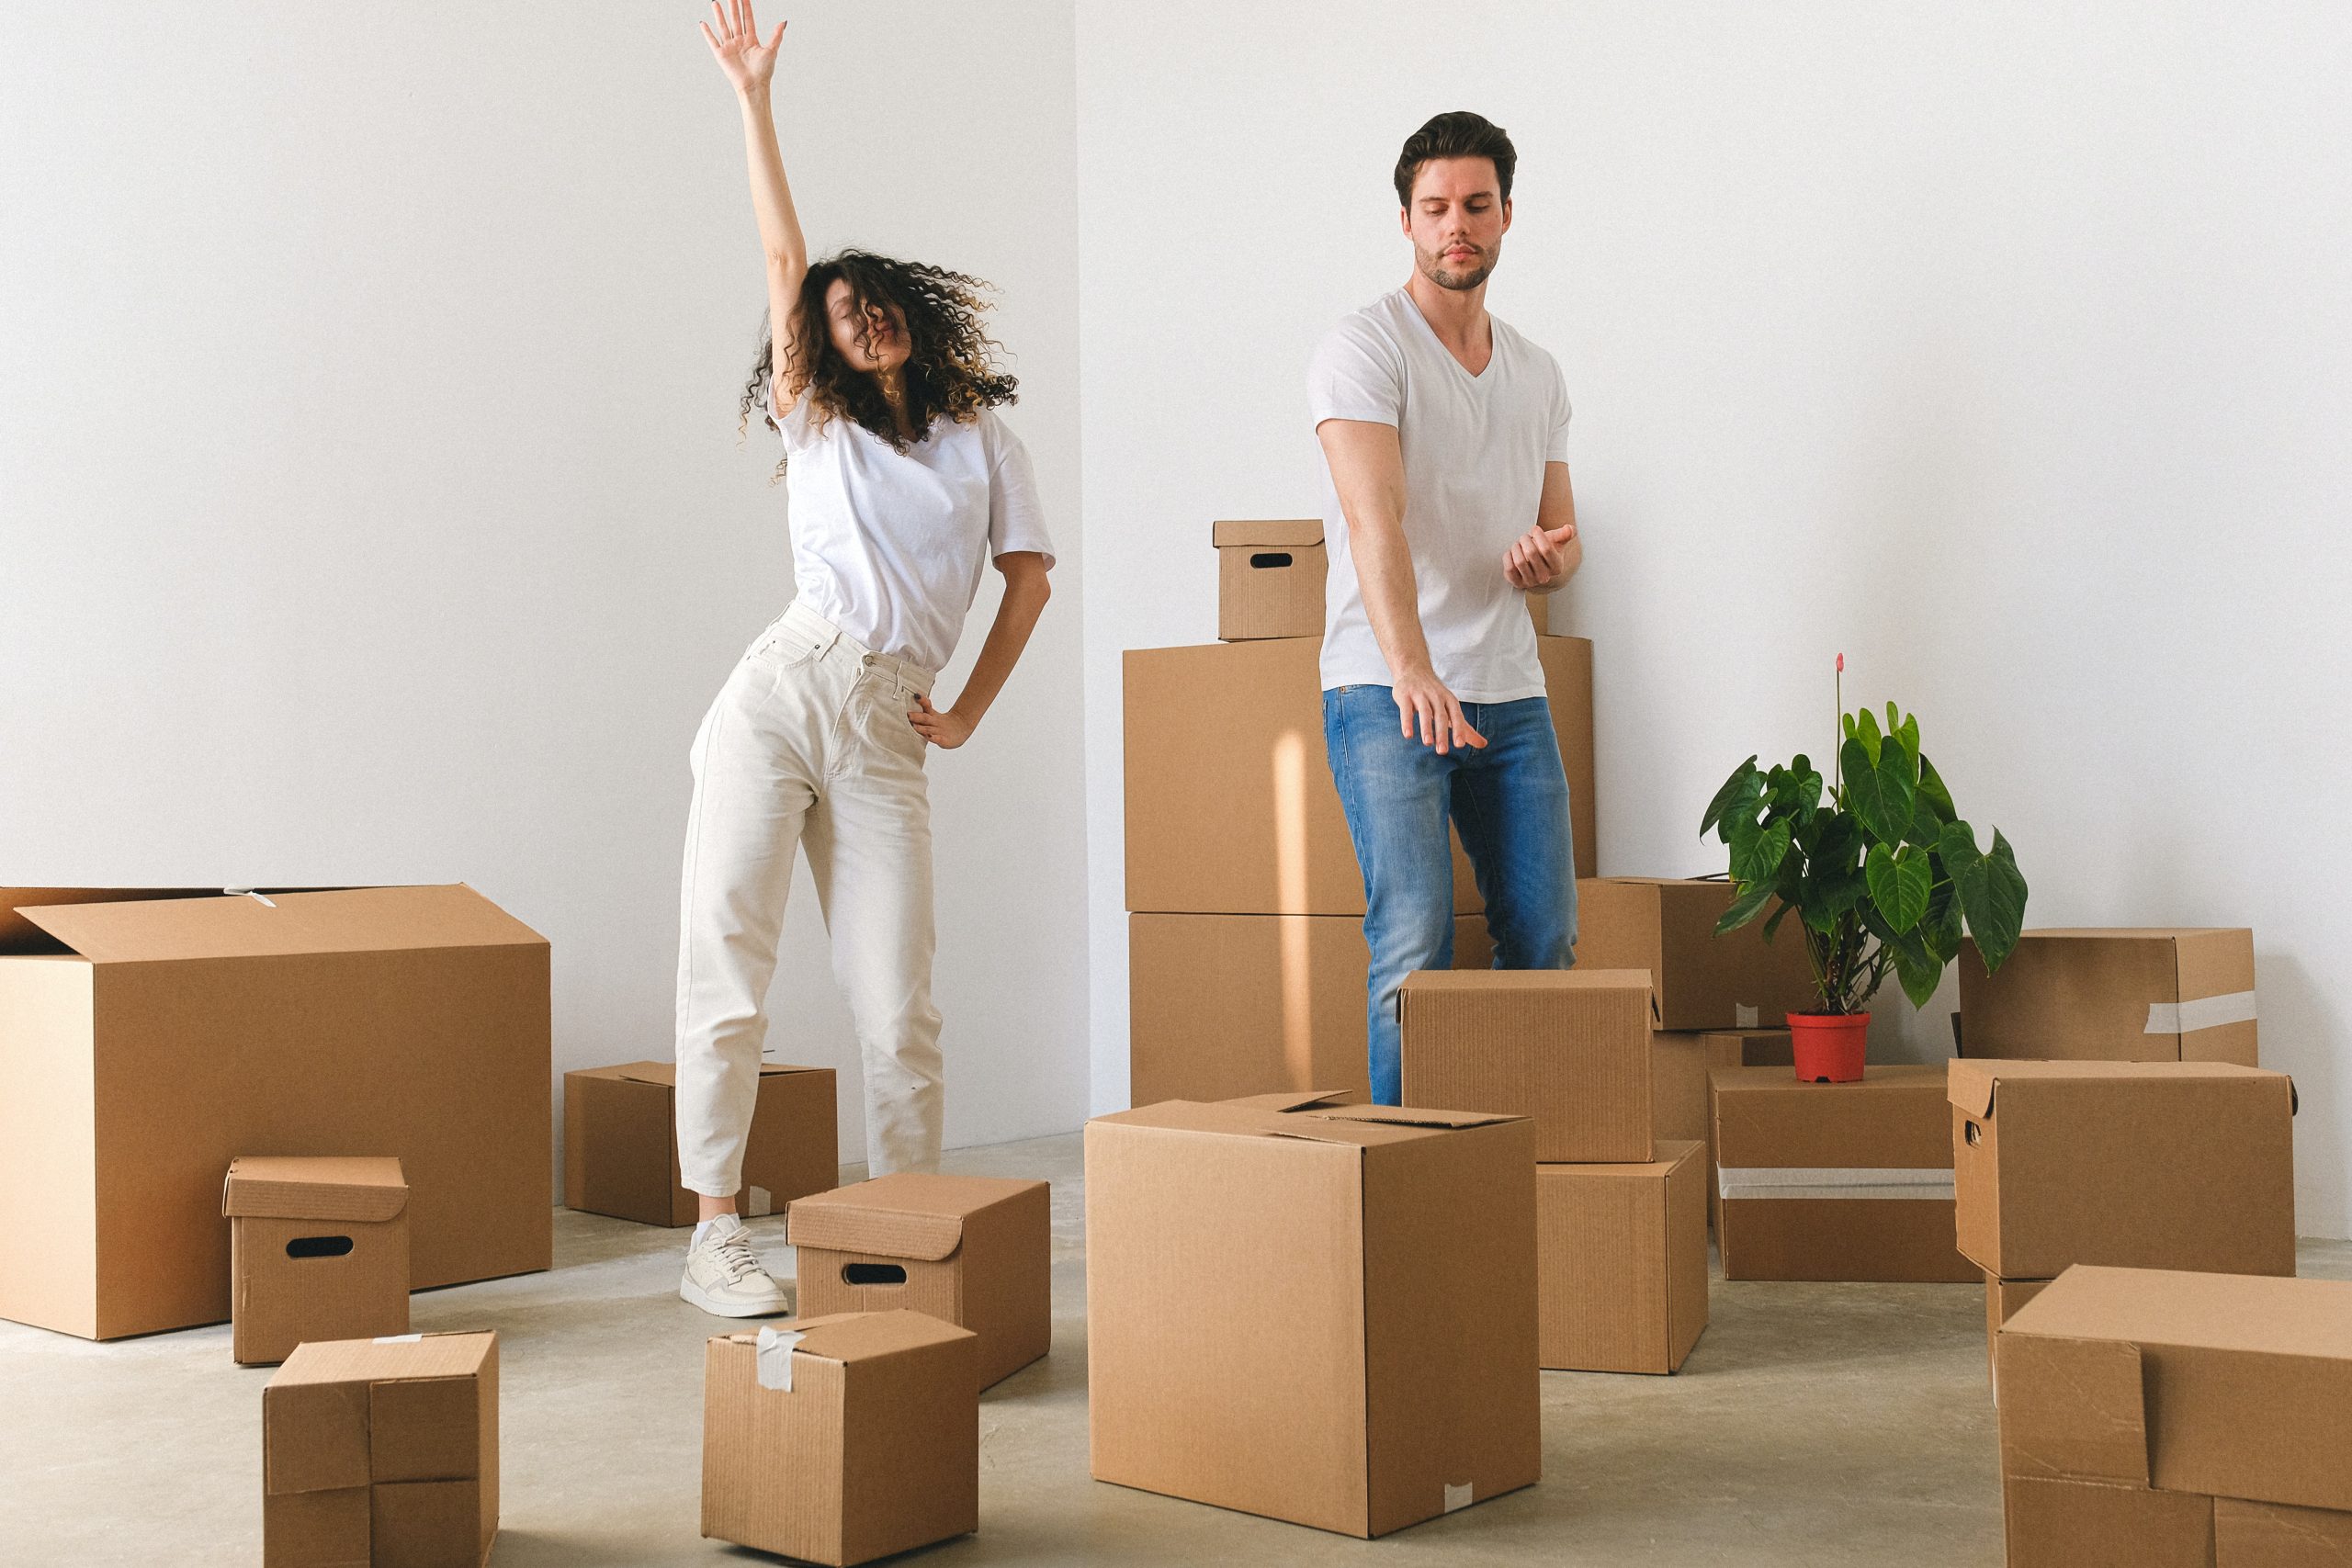 5 Questions To Ask When Planning a Move